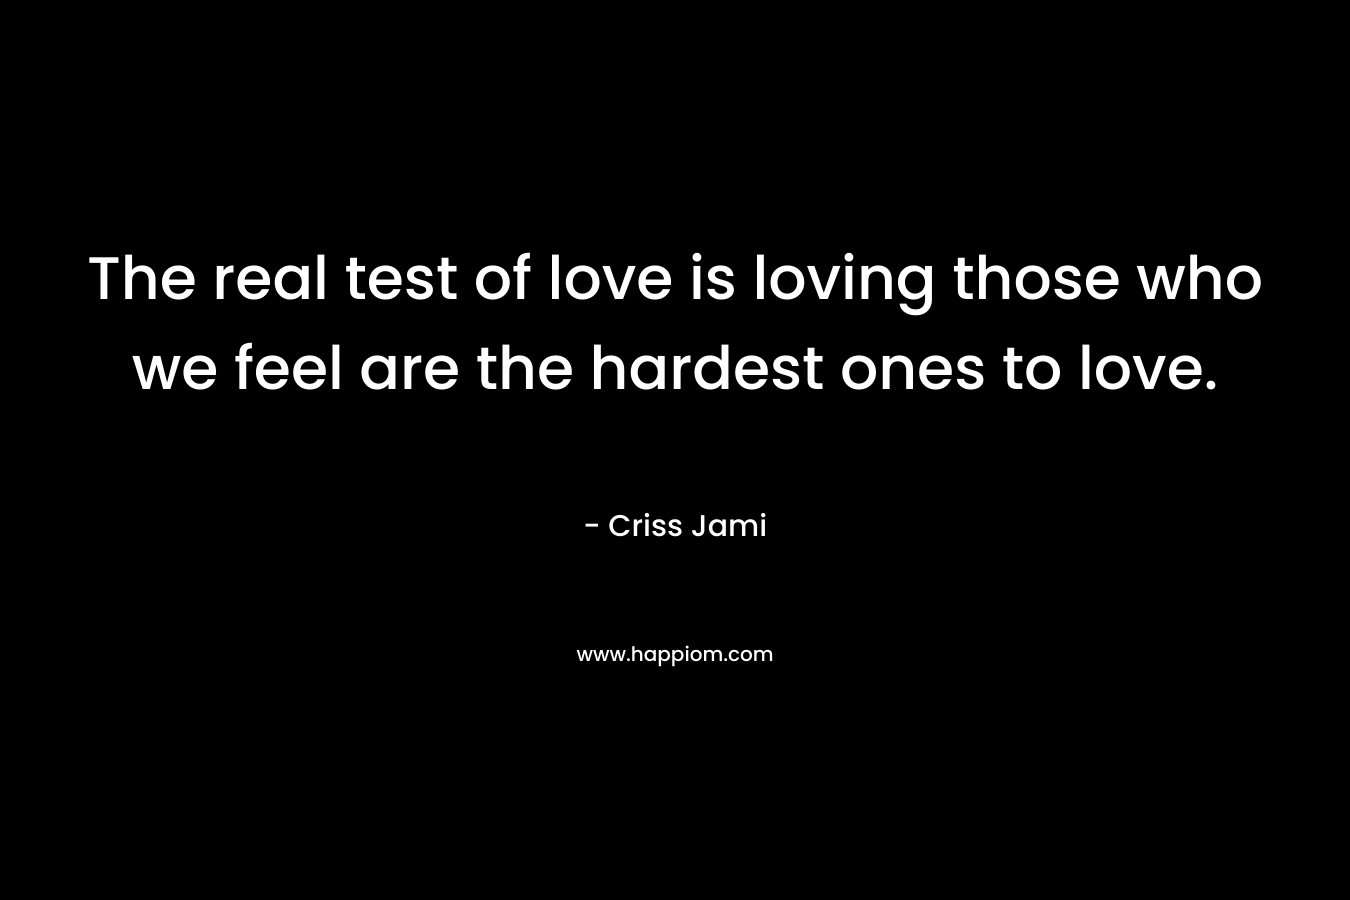 The real test of love is loving those who we feel are the hardest ones to love.